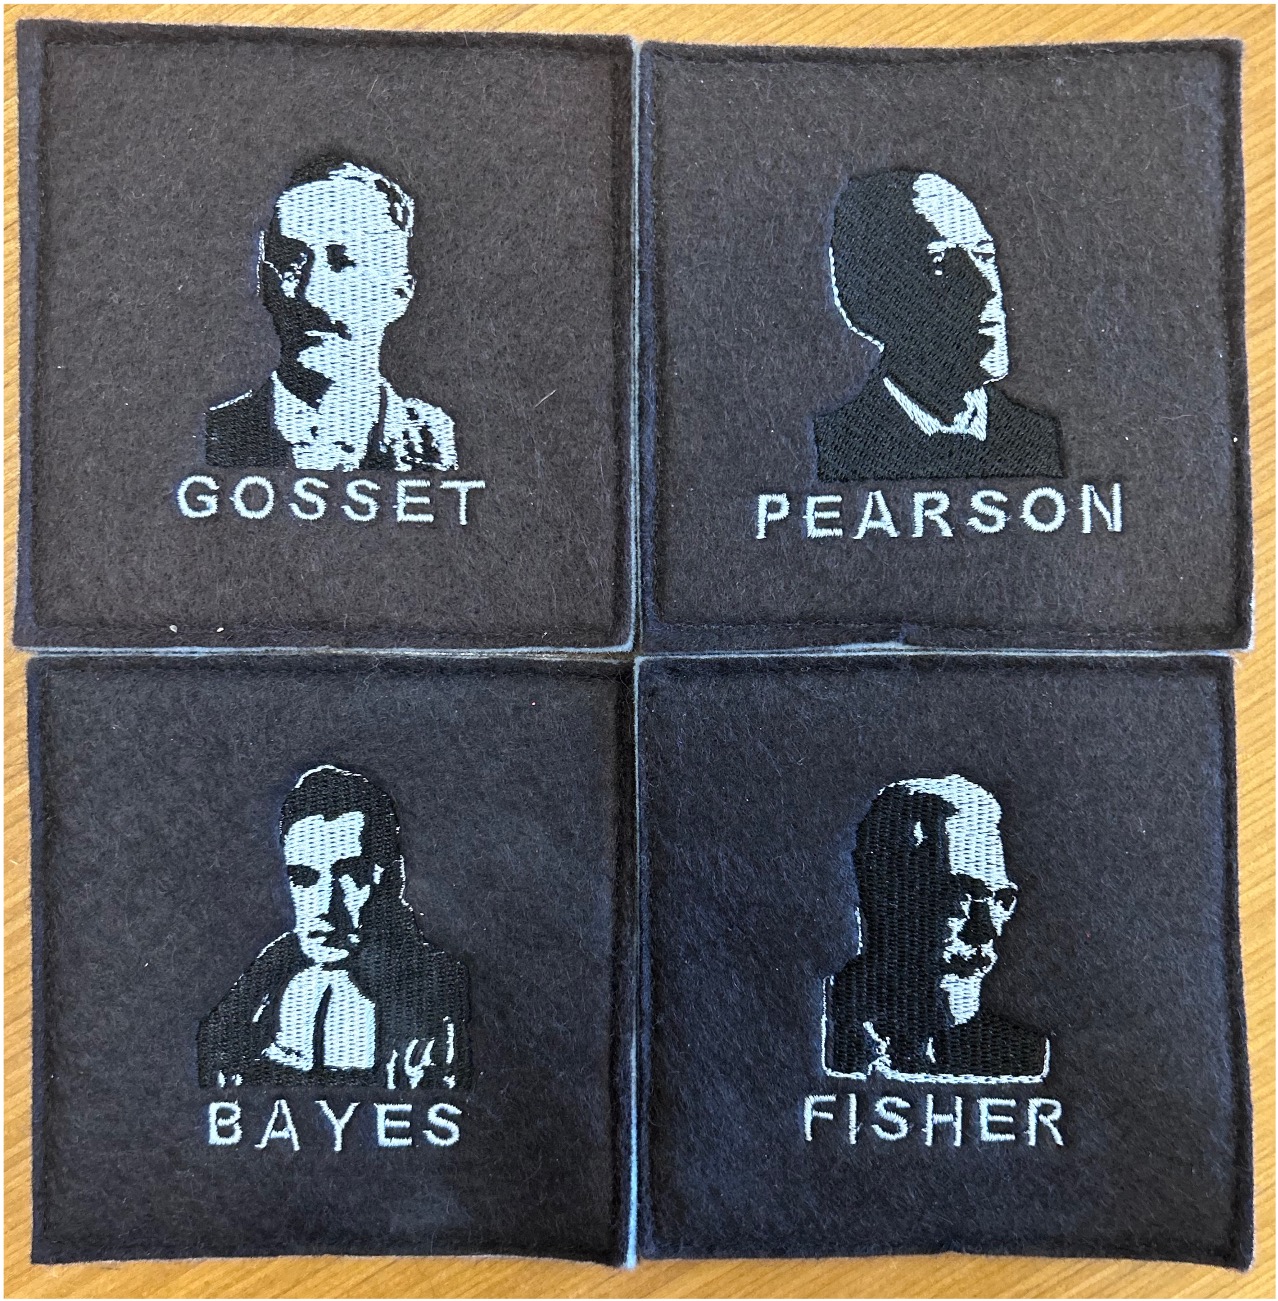 A set of four coasters including Gosset, Pearson, Bayes, and Fisher